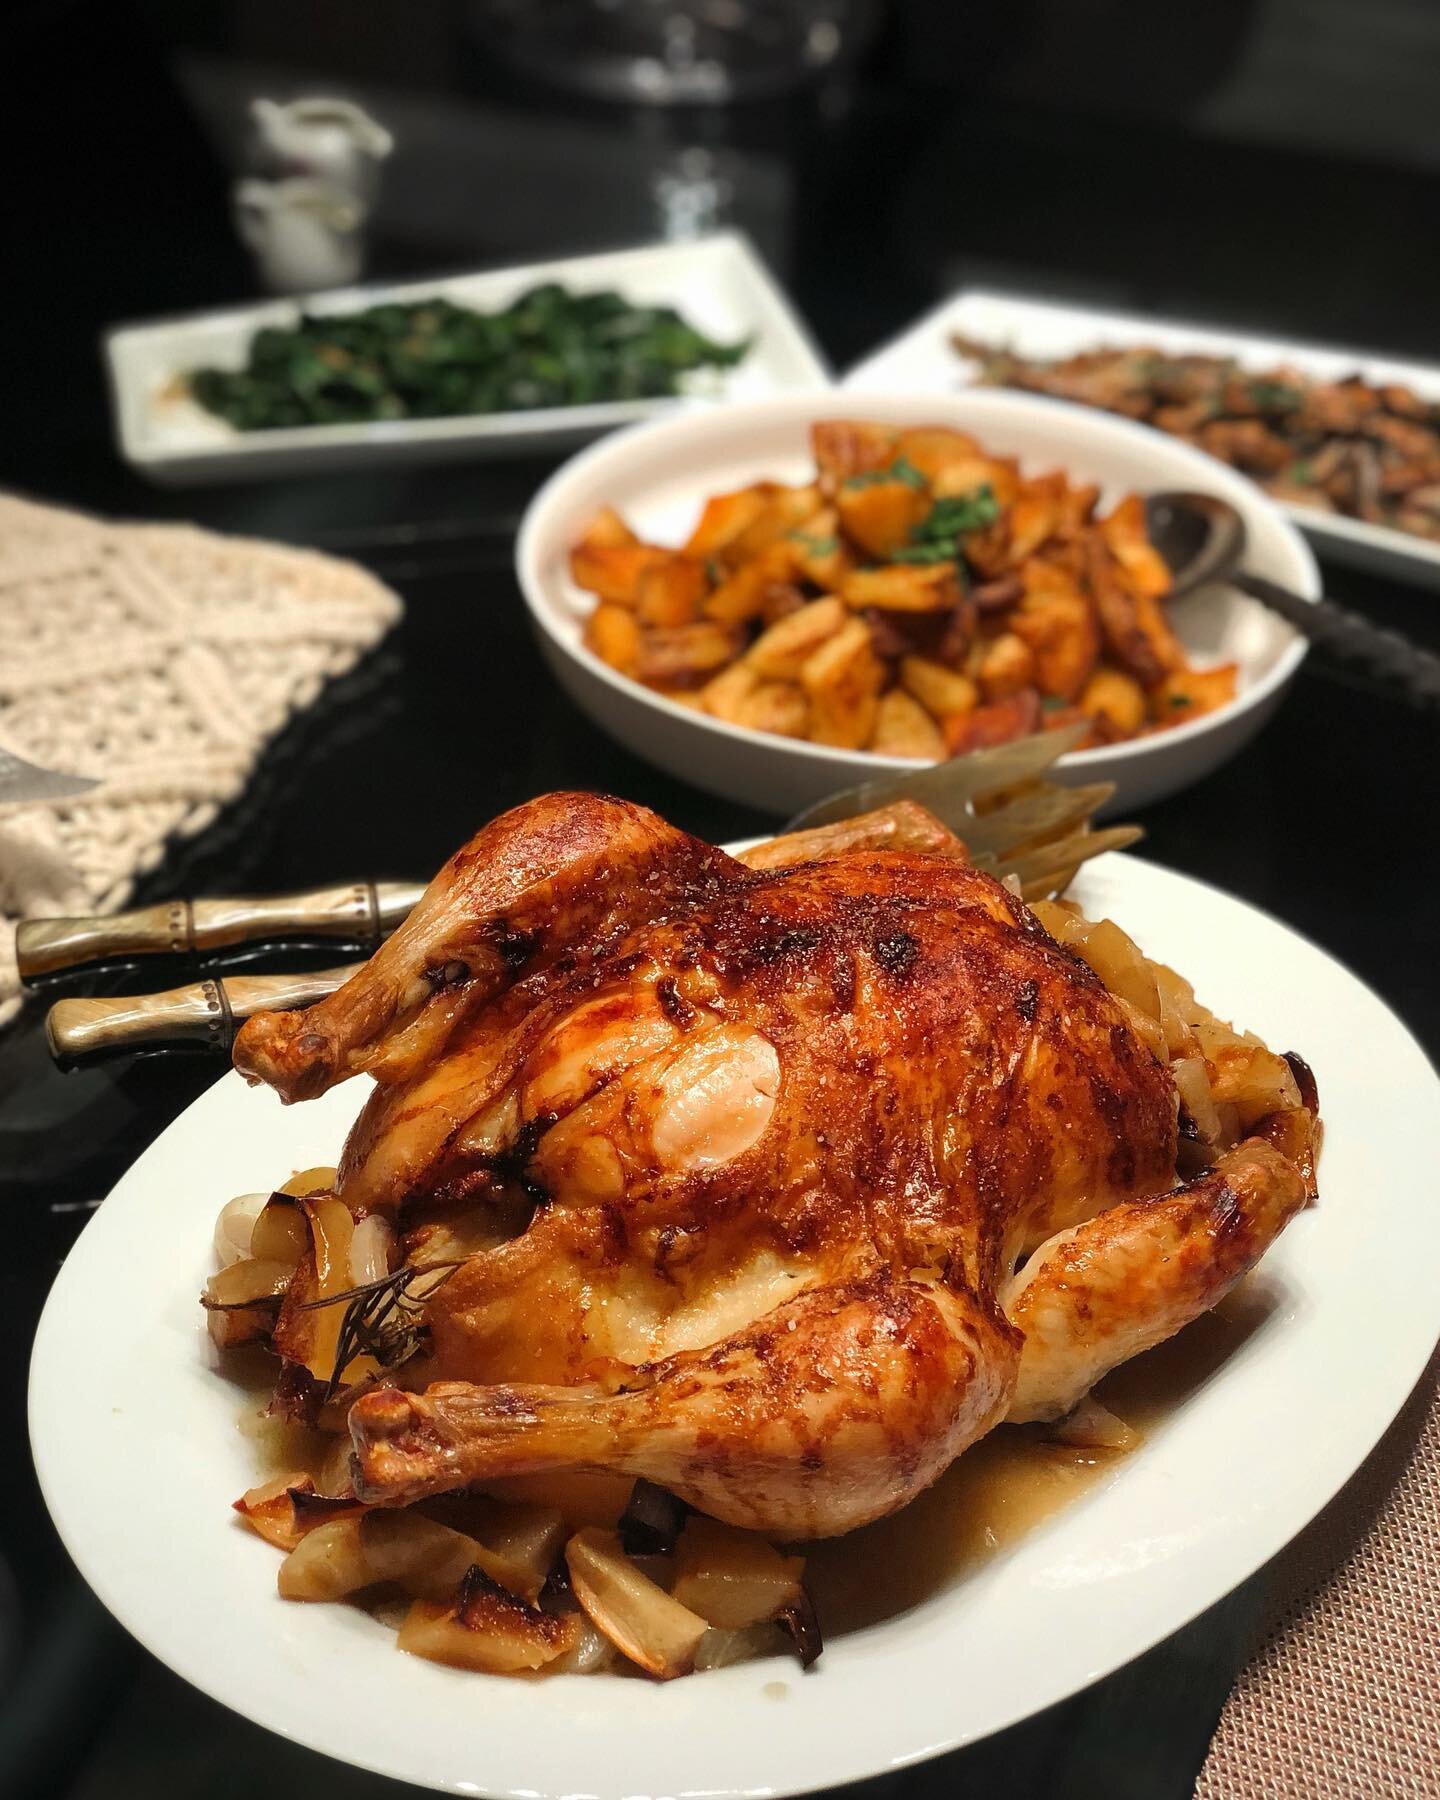 Chicken Dinner 🥘 
poulet aux pommes 🍎 
Crispy potatoes 🥔
Saut&eacute;ed spinach 🌱
Mixed mushrooms 🍄 
Sweet &amp; savory dinner for a Tuesday evening. Cheers 🥂